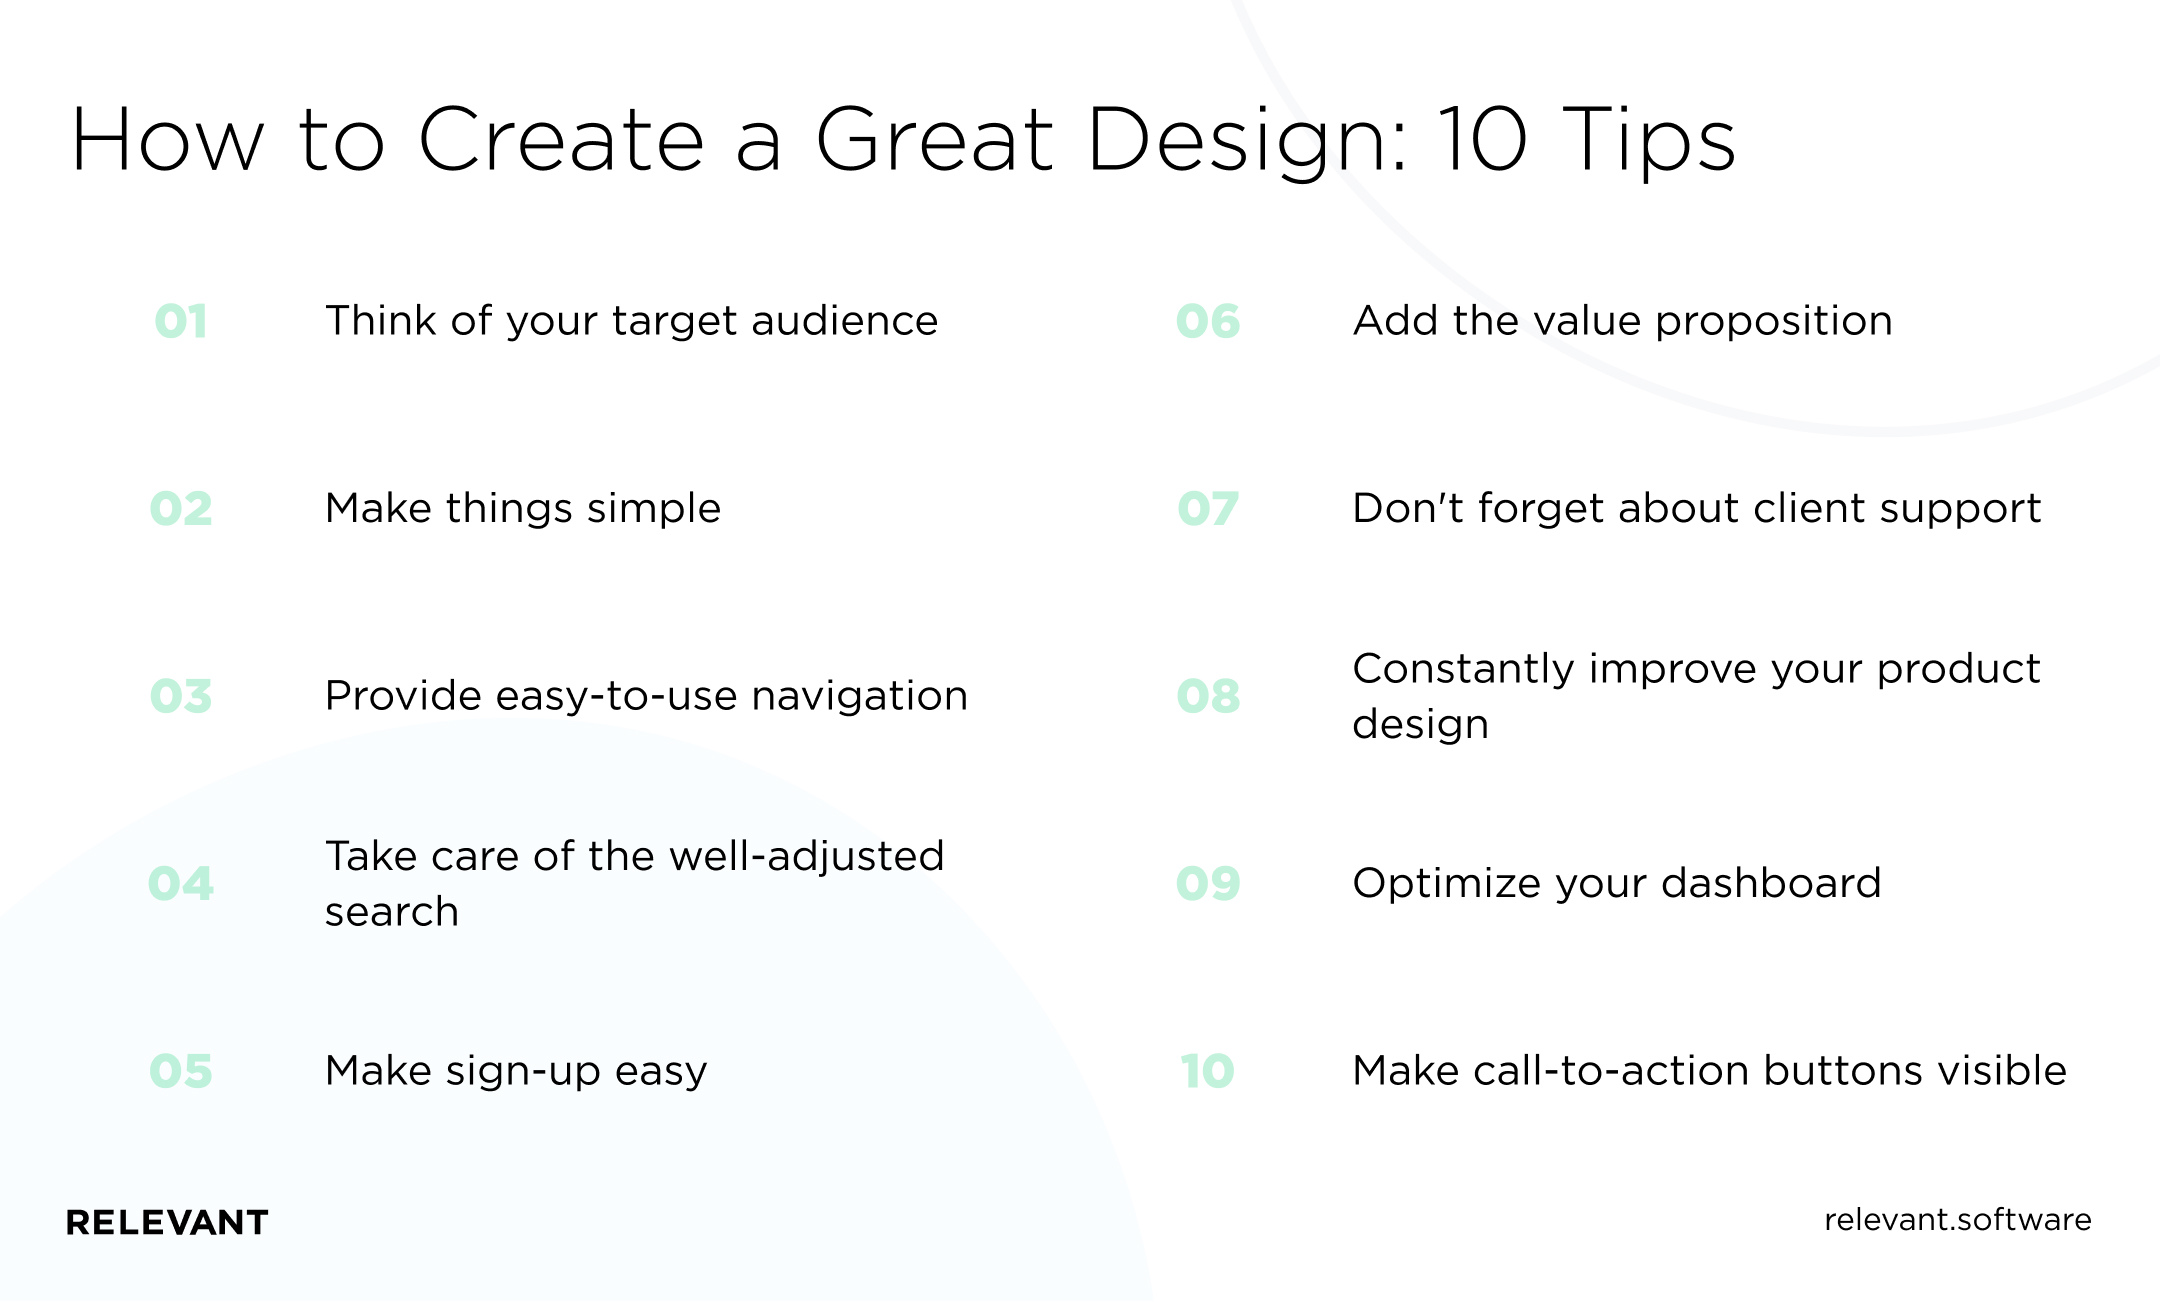 How to Create a Great SaaS Design: 10 Tips